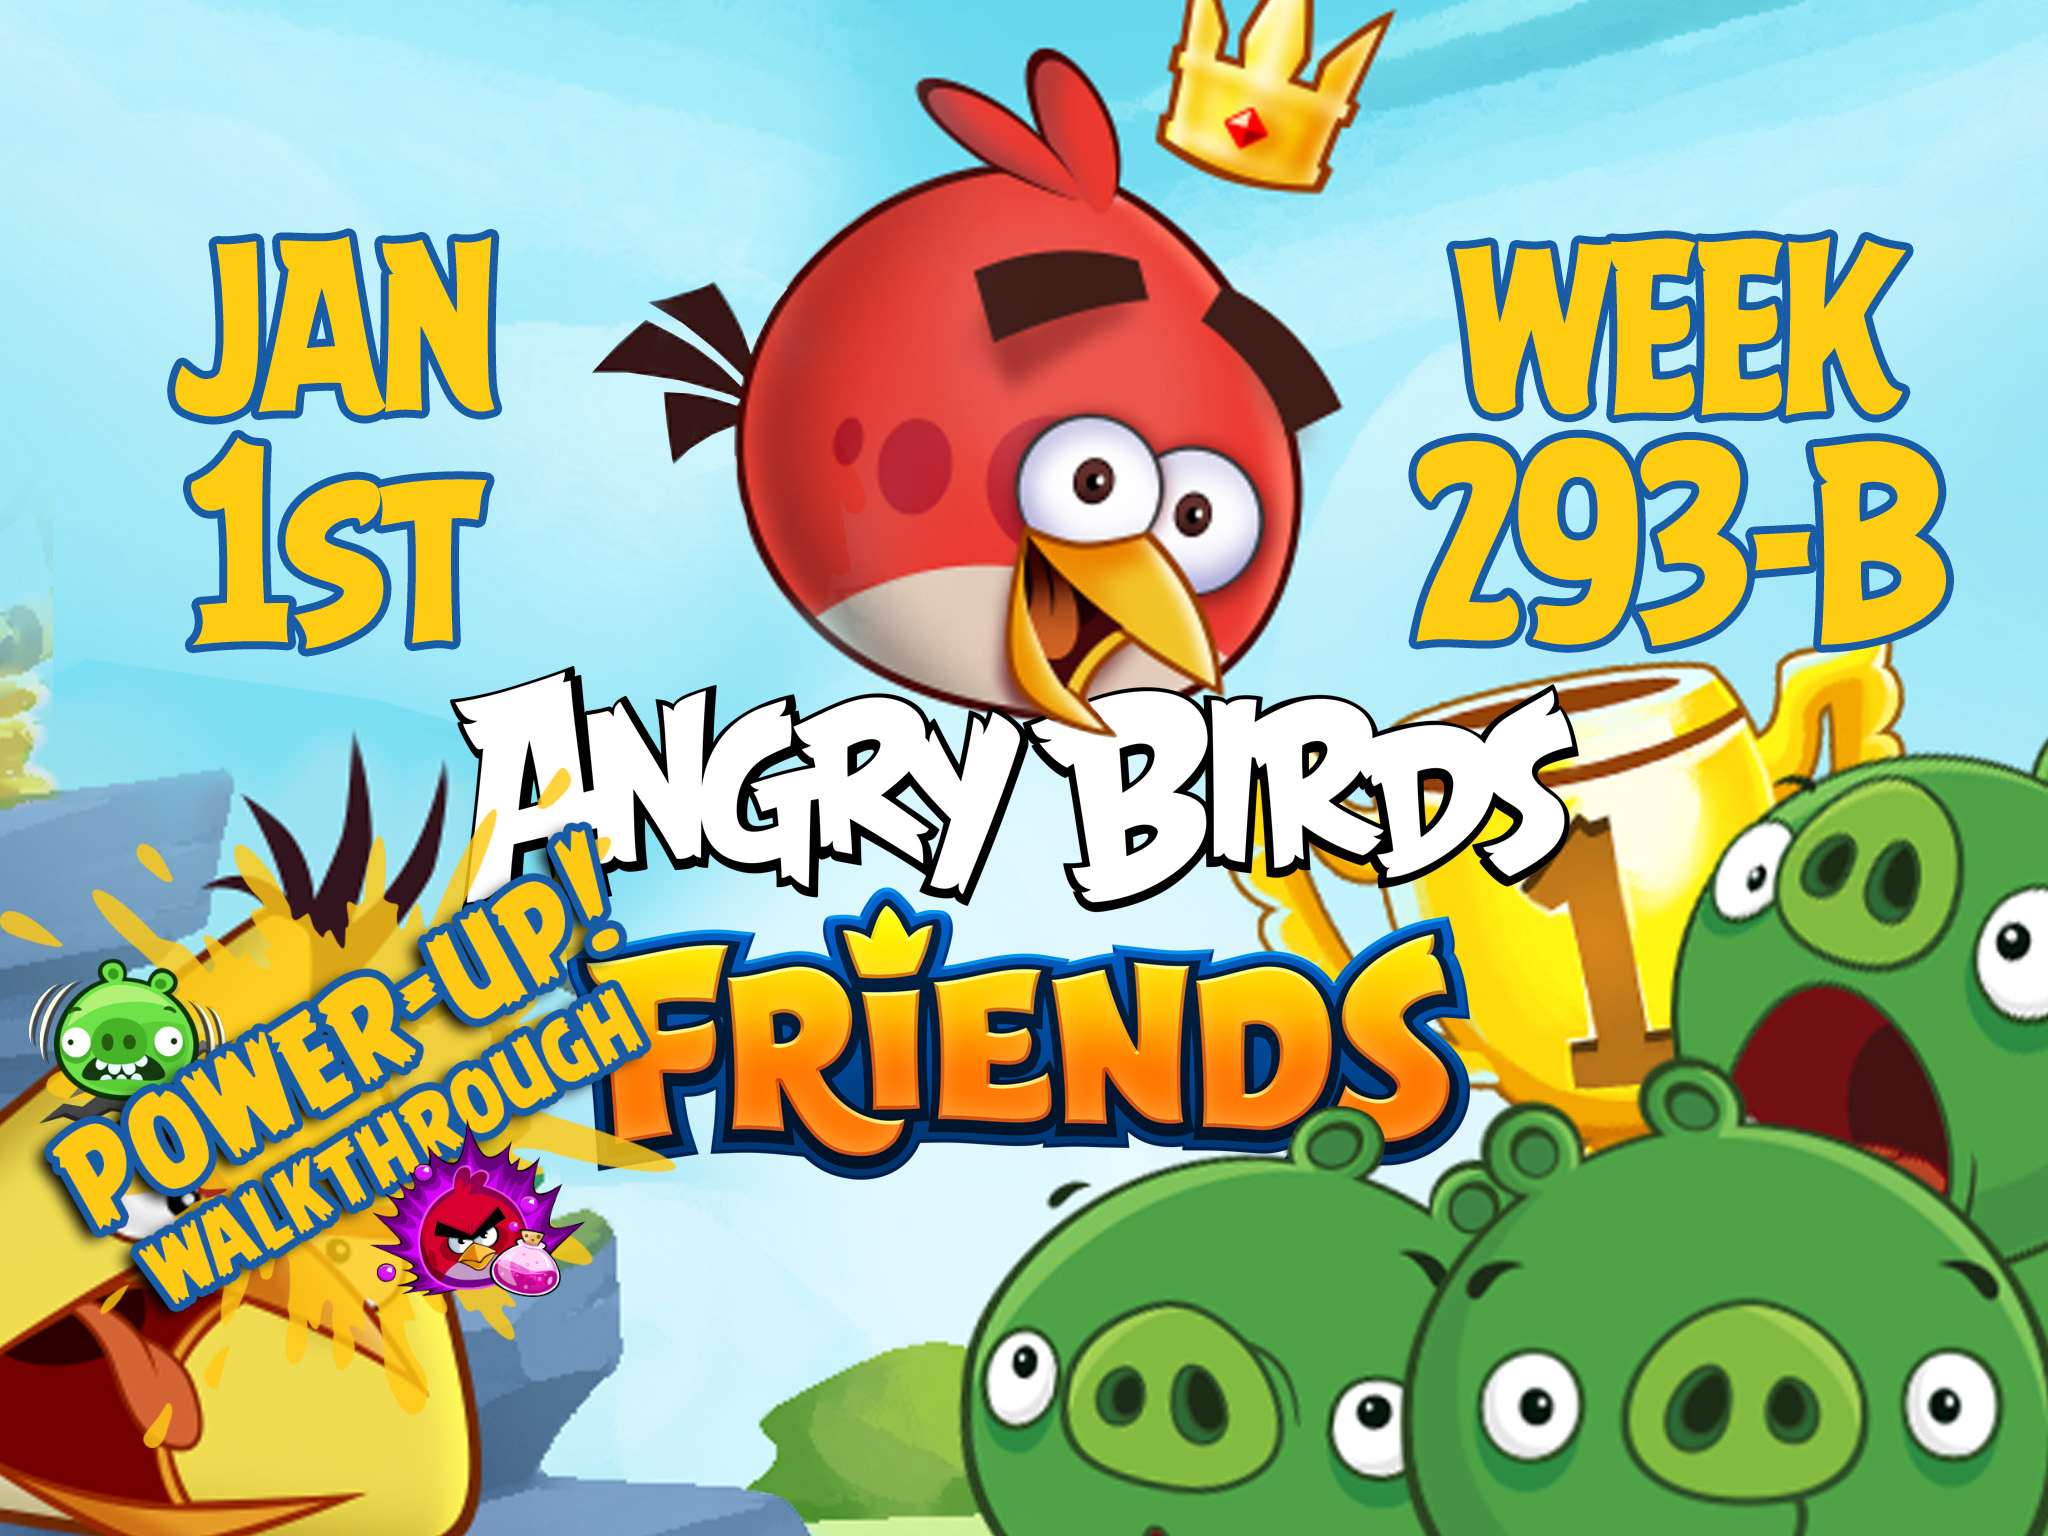 Angry Birds Friends Tournament Week 293-B Feature Image PU